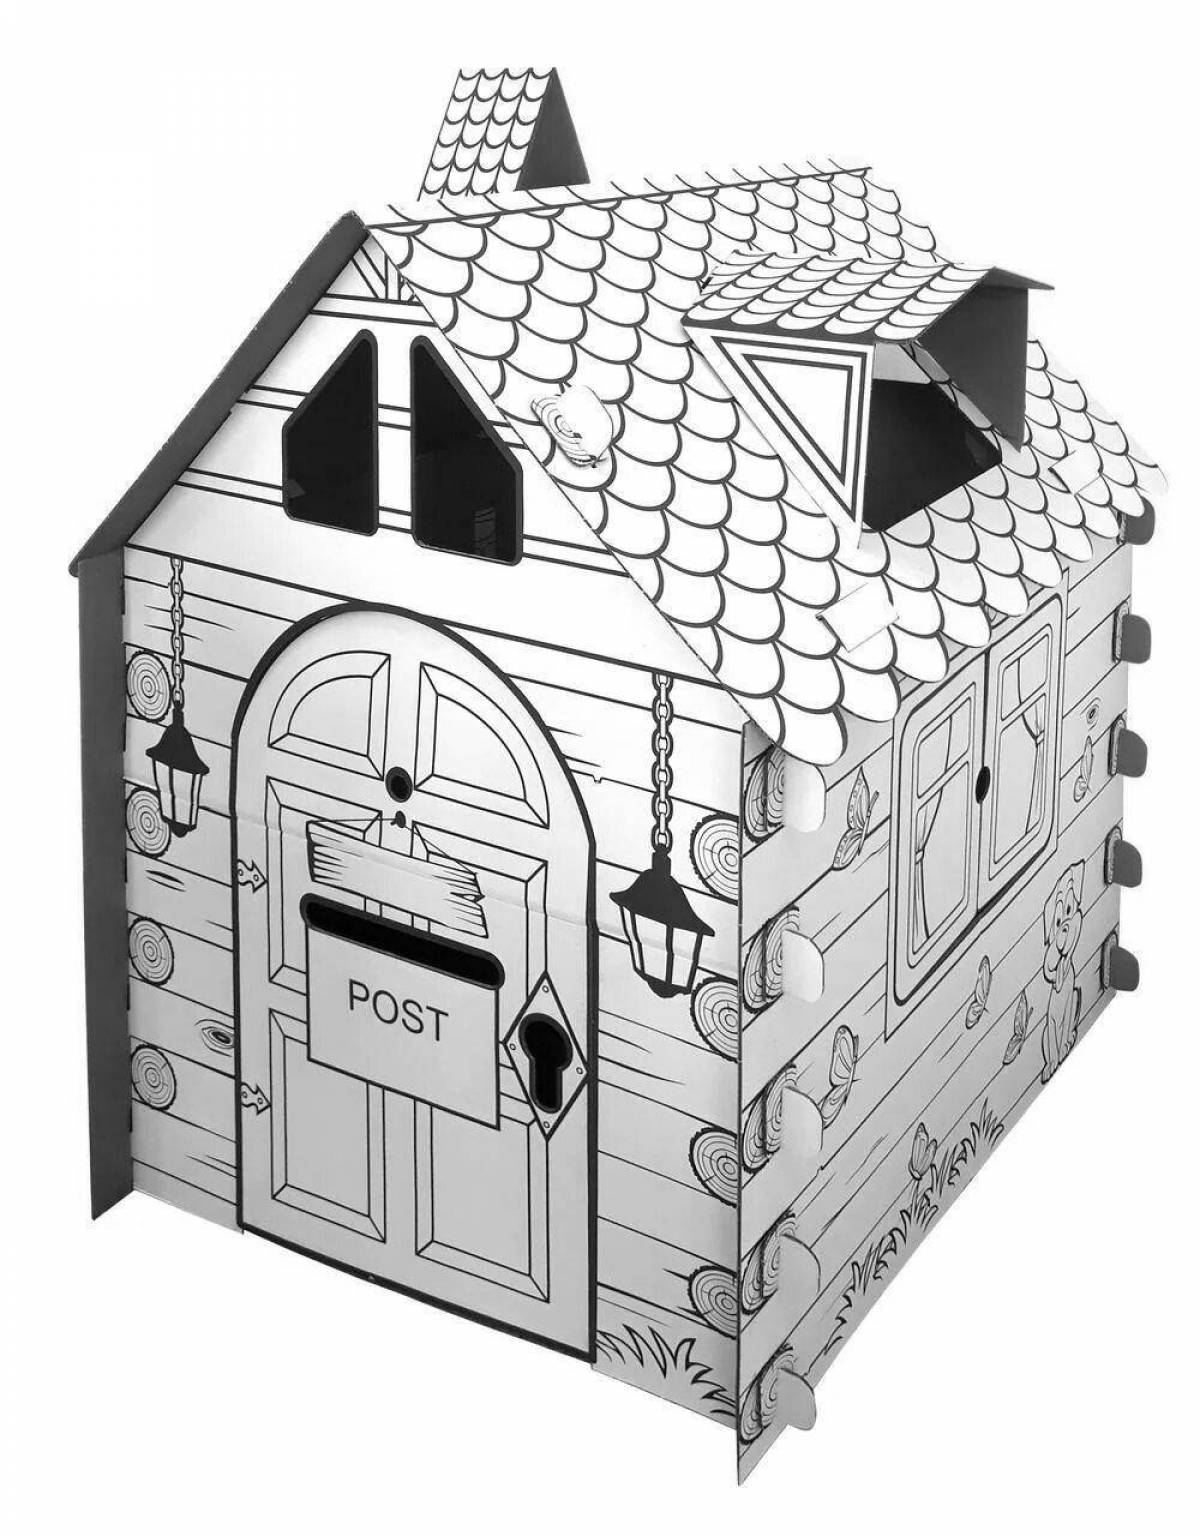 Charming cardboard house price coloring